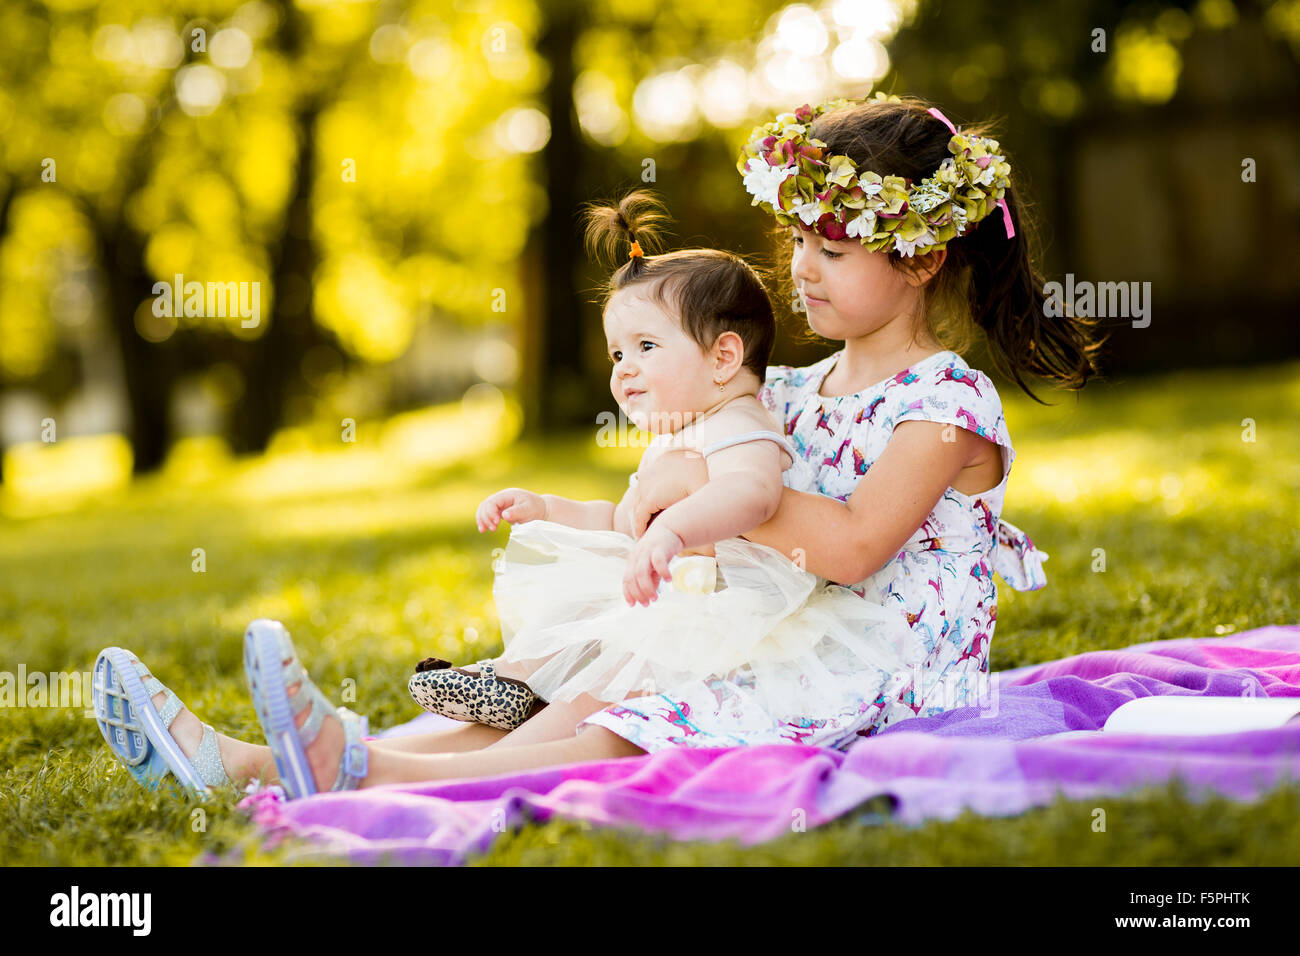 Little girl and baby sitting in the grass Stock Photo